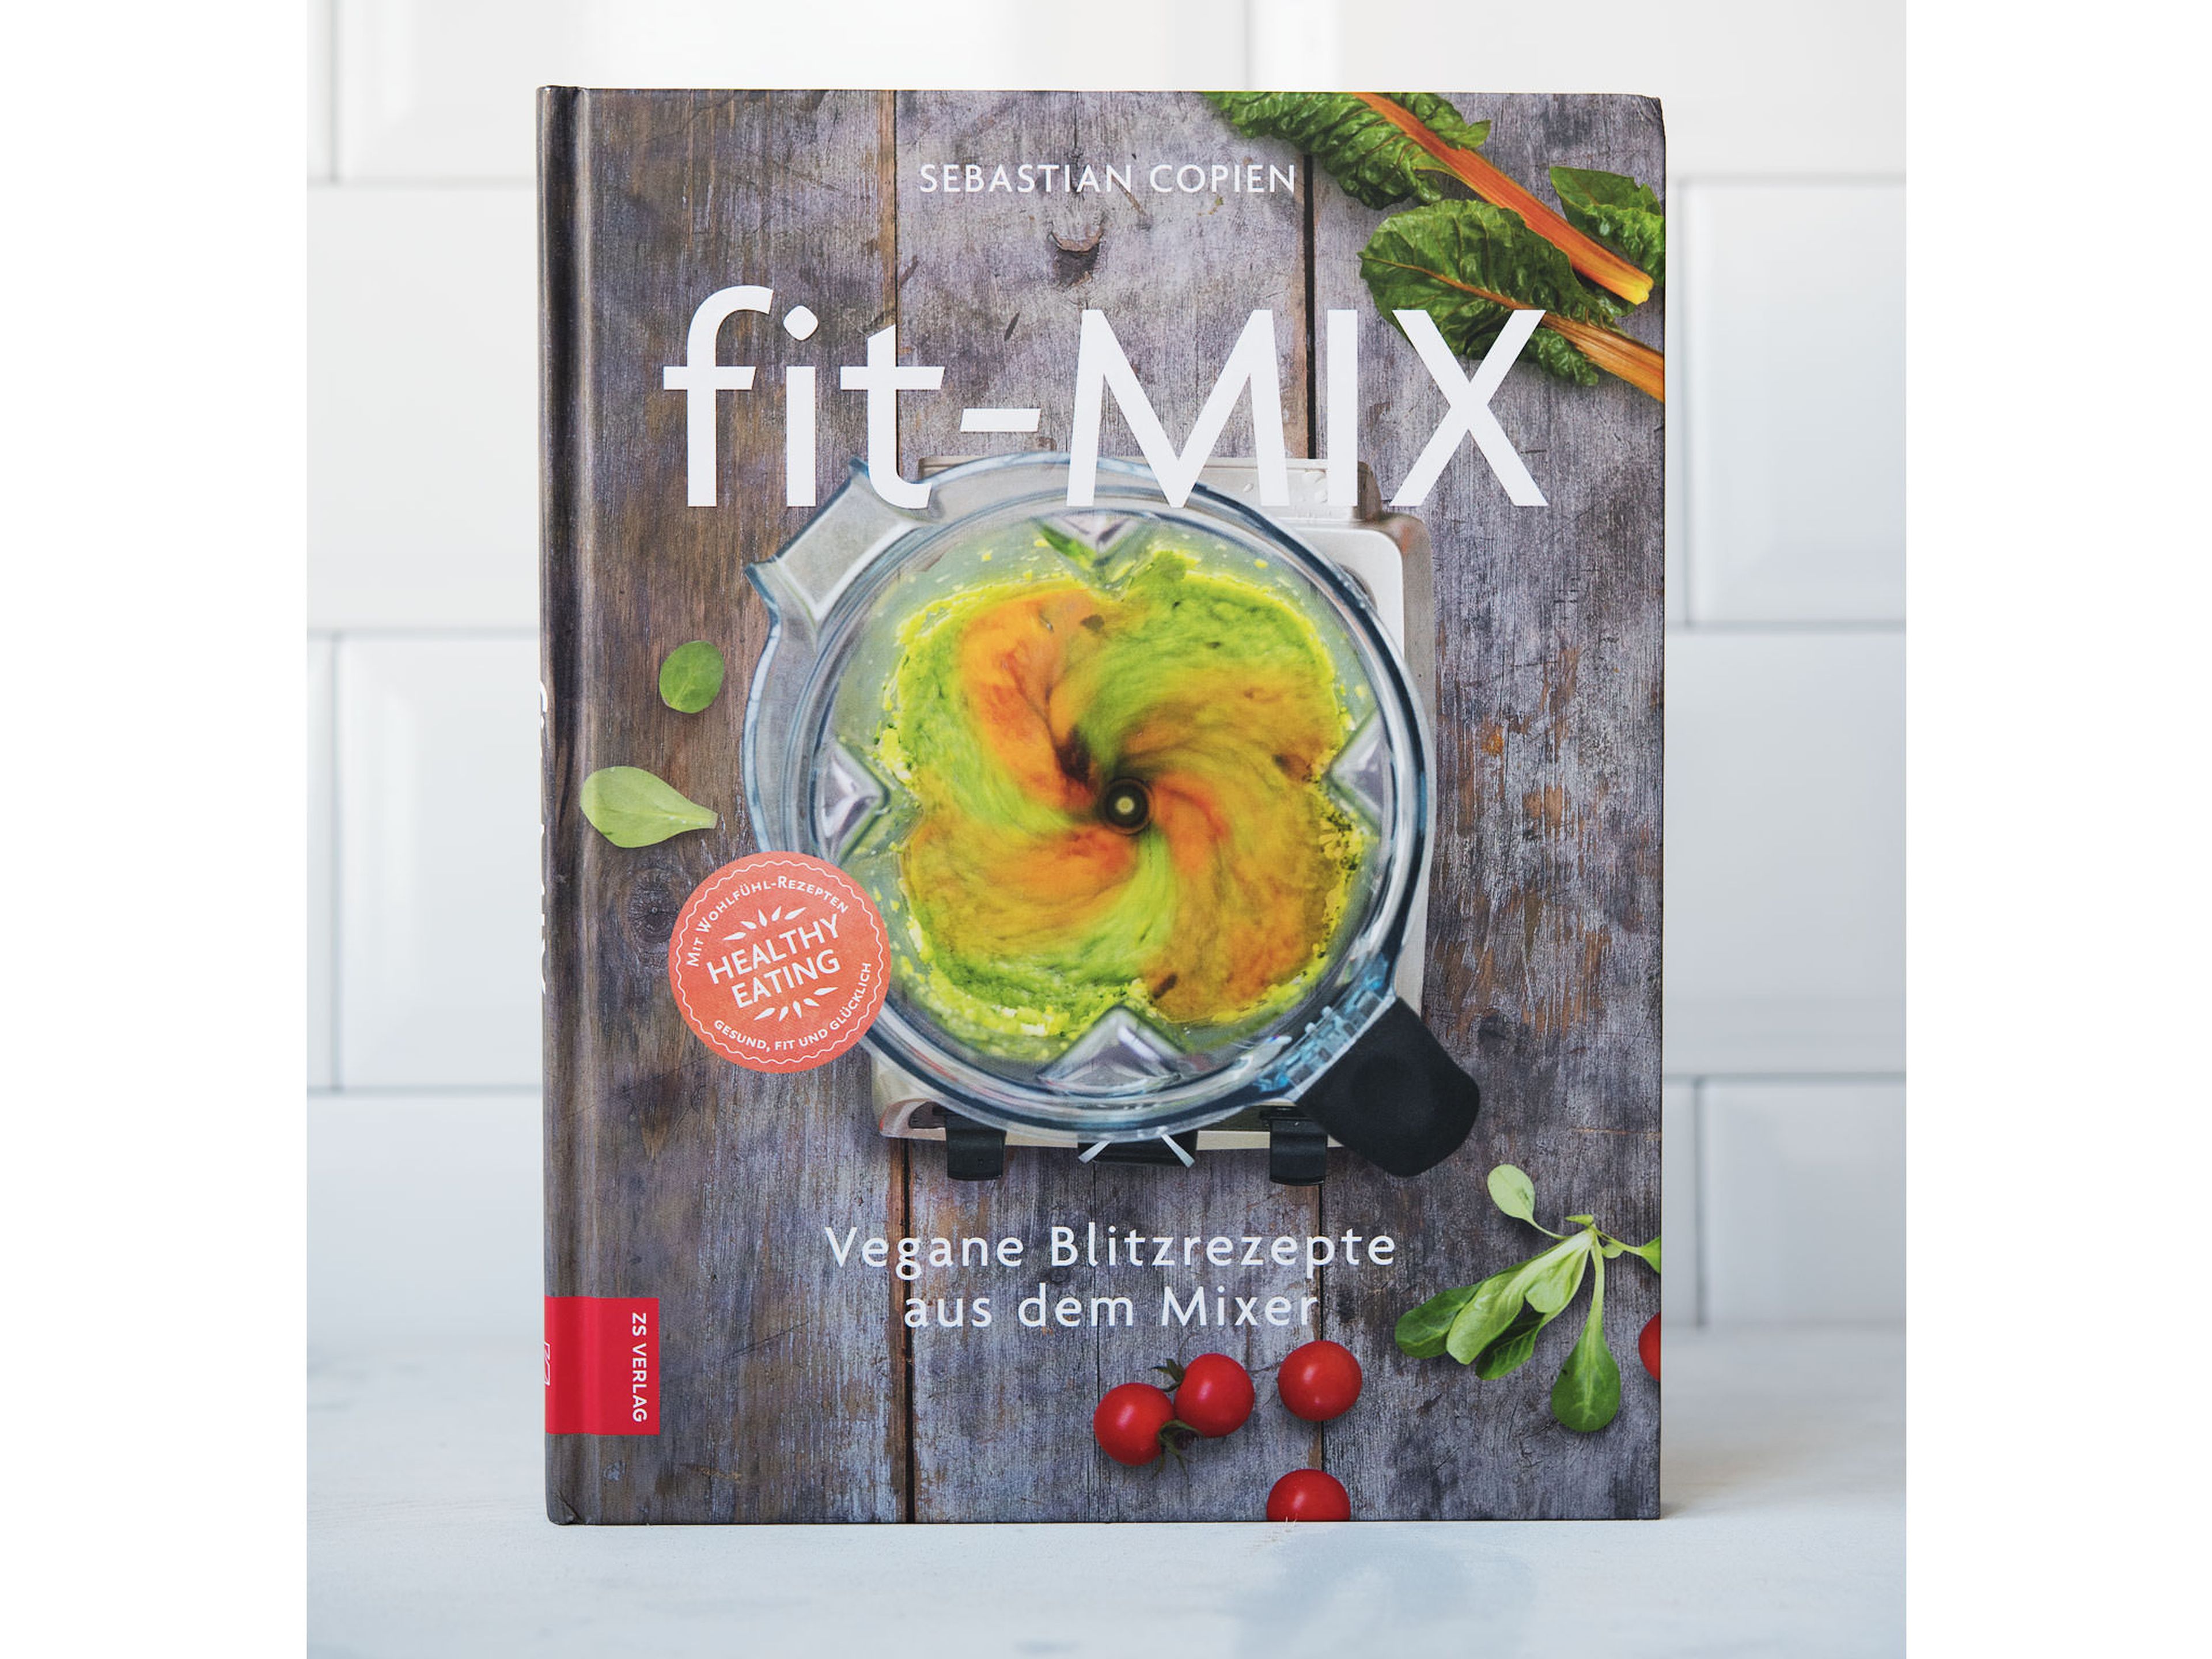 This and many more recipes can be found in Sebastian Copien´s cookbook "Fit-Mix" (ZS Verlag).